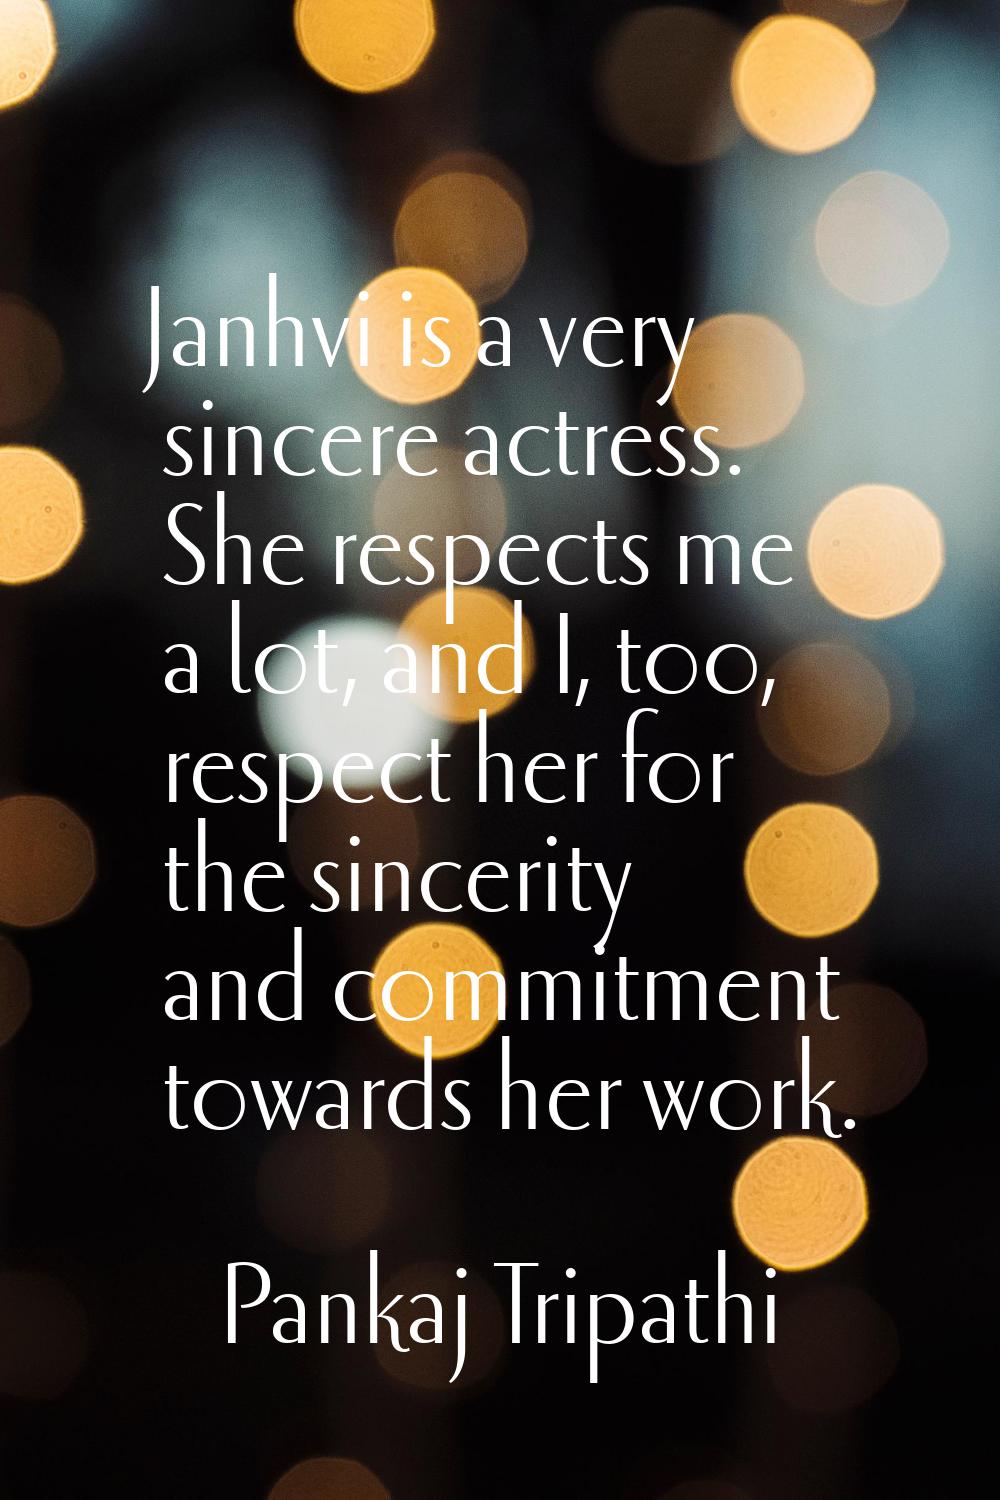 Janhvi is a very sincere actress. She respects me a lot, and I, too, respect her for the sincerity 